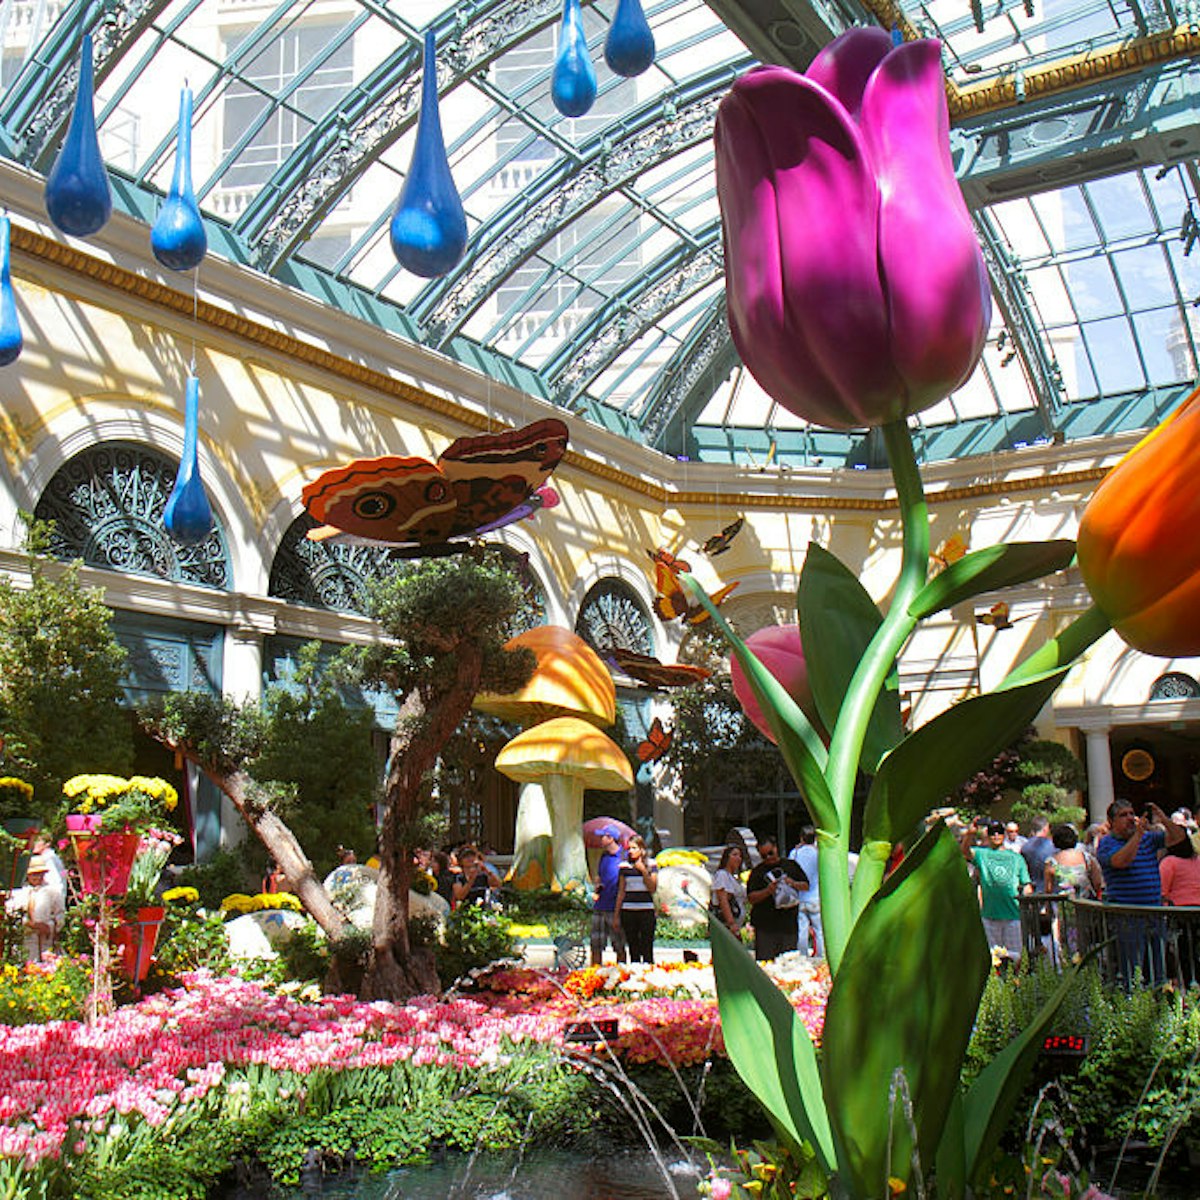 Conservatory & Botanical Gardens at the Bellagio. (Photo by: Jeffrey Greenberg/Universal Images Group via Getty Images)
630060396
South Las Vegas Boulevard, Conservatory & Botanical Gardens, giant tulips